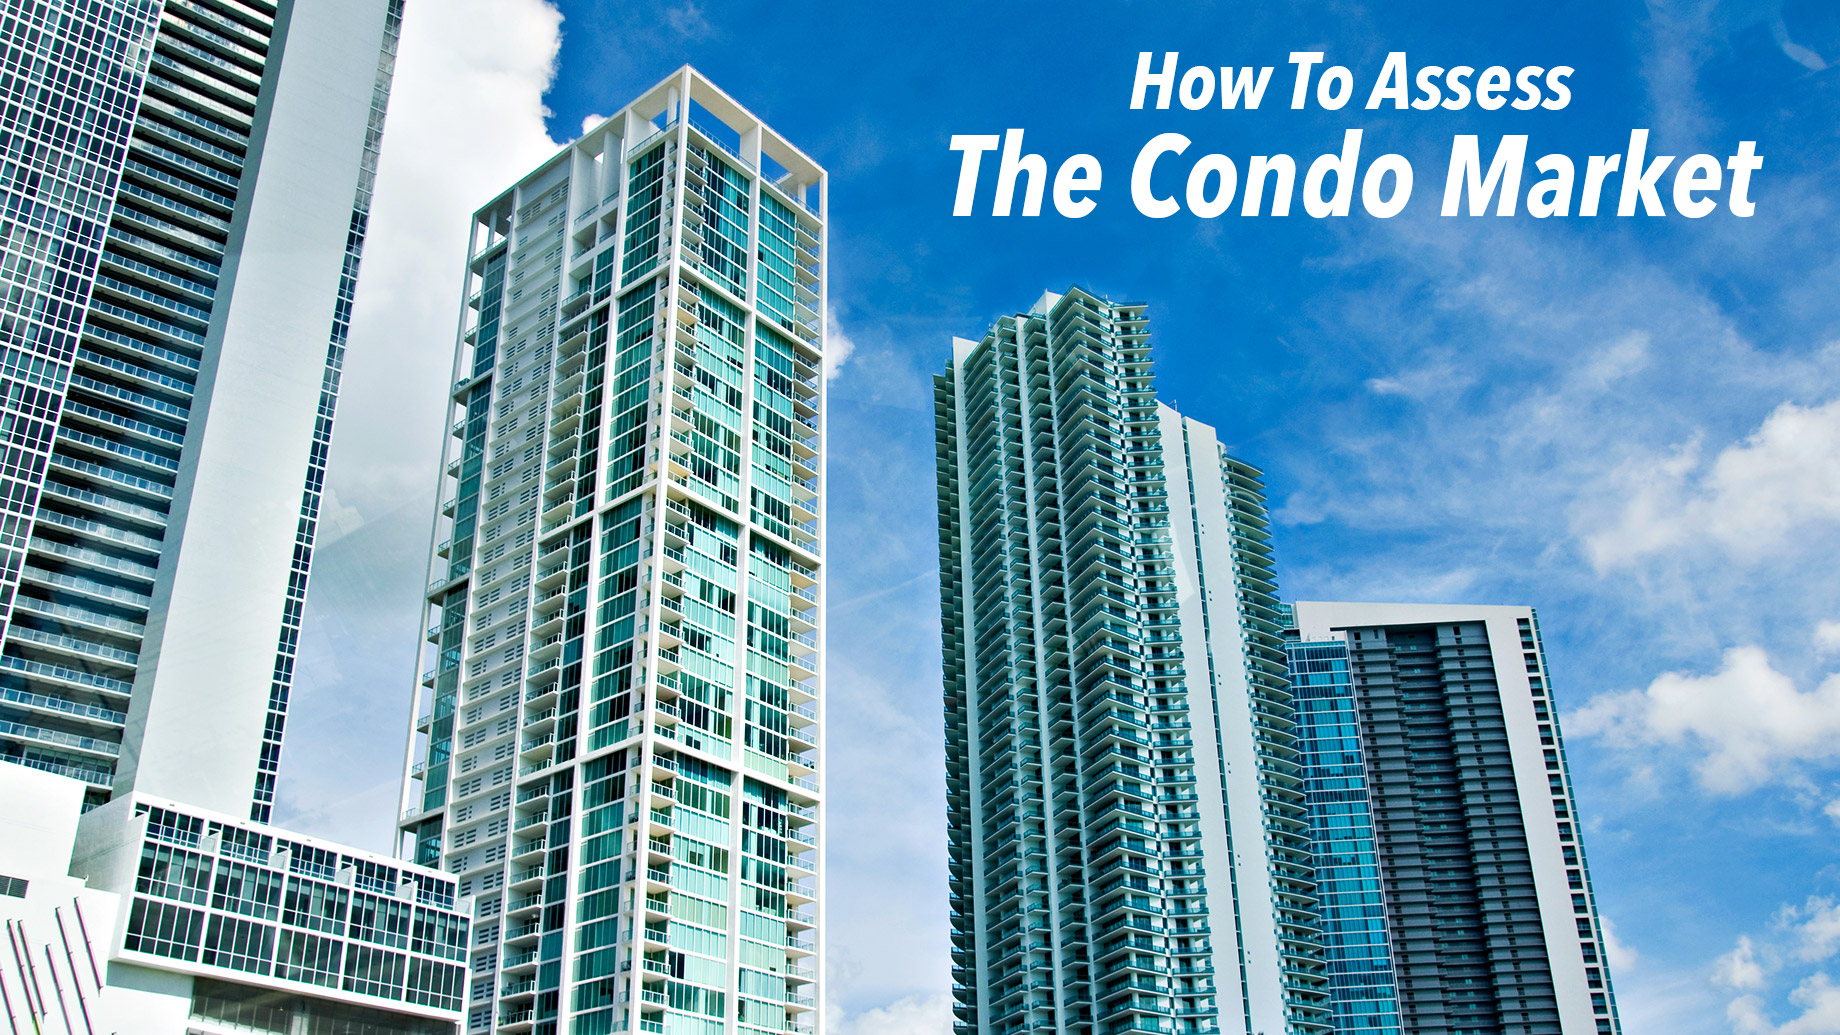 How To Assess The Condo Market